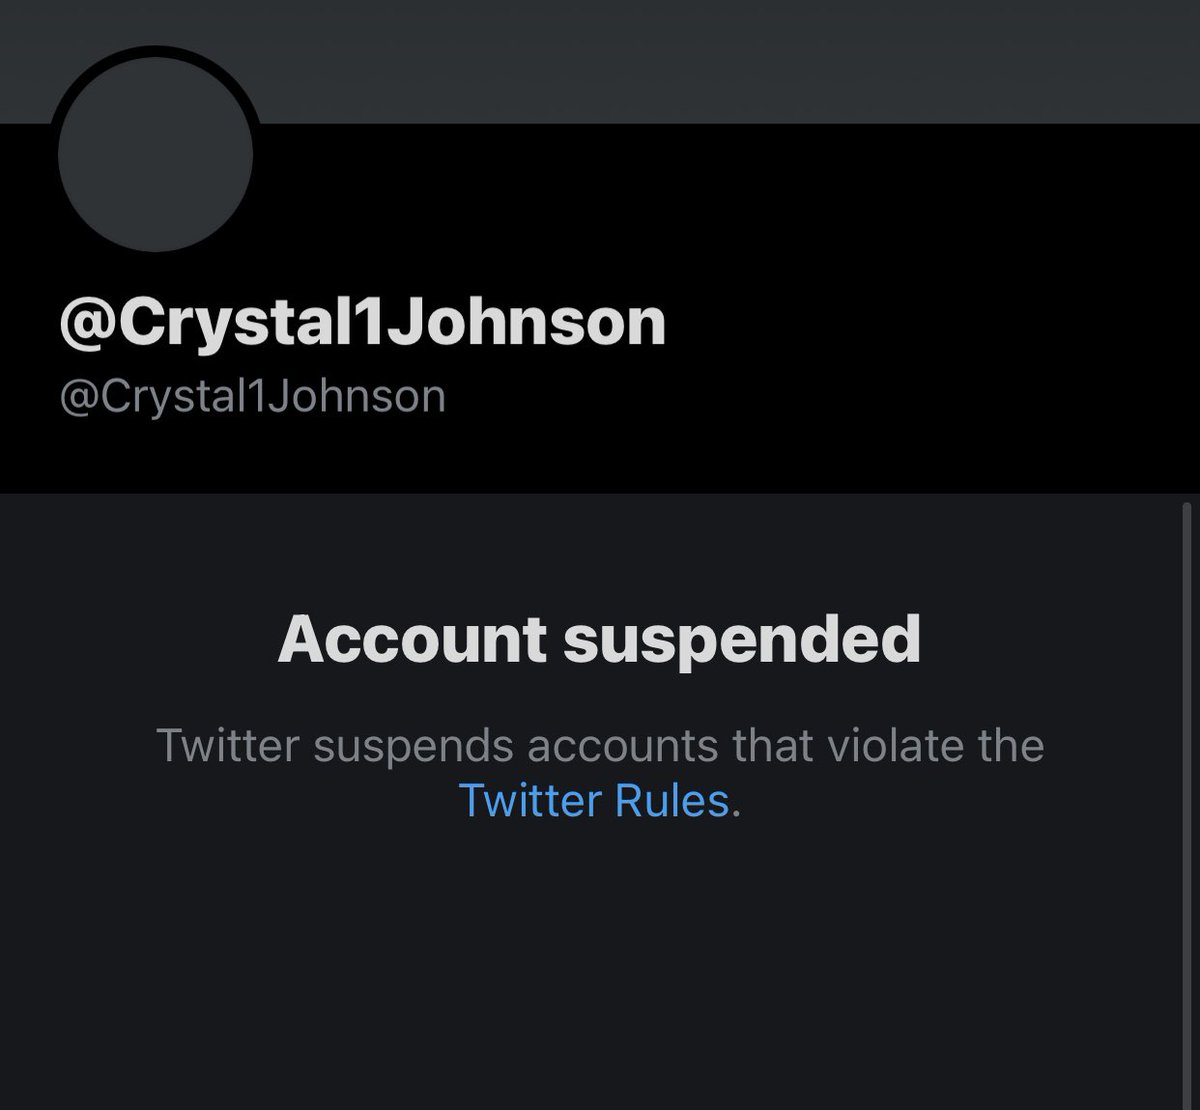 @solodeauxleaux @Crystal1Johnson was a mildly popular black Twitter account that turned out to be a bot 🤖